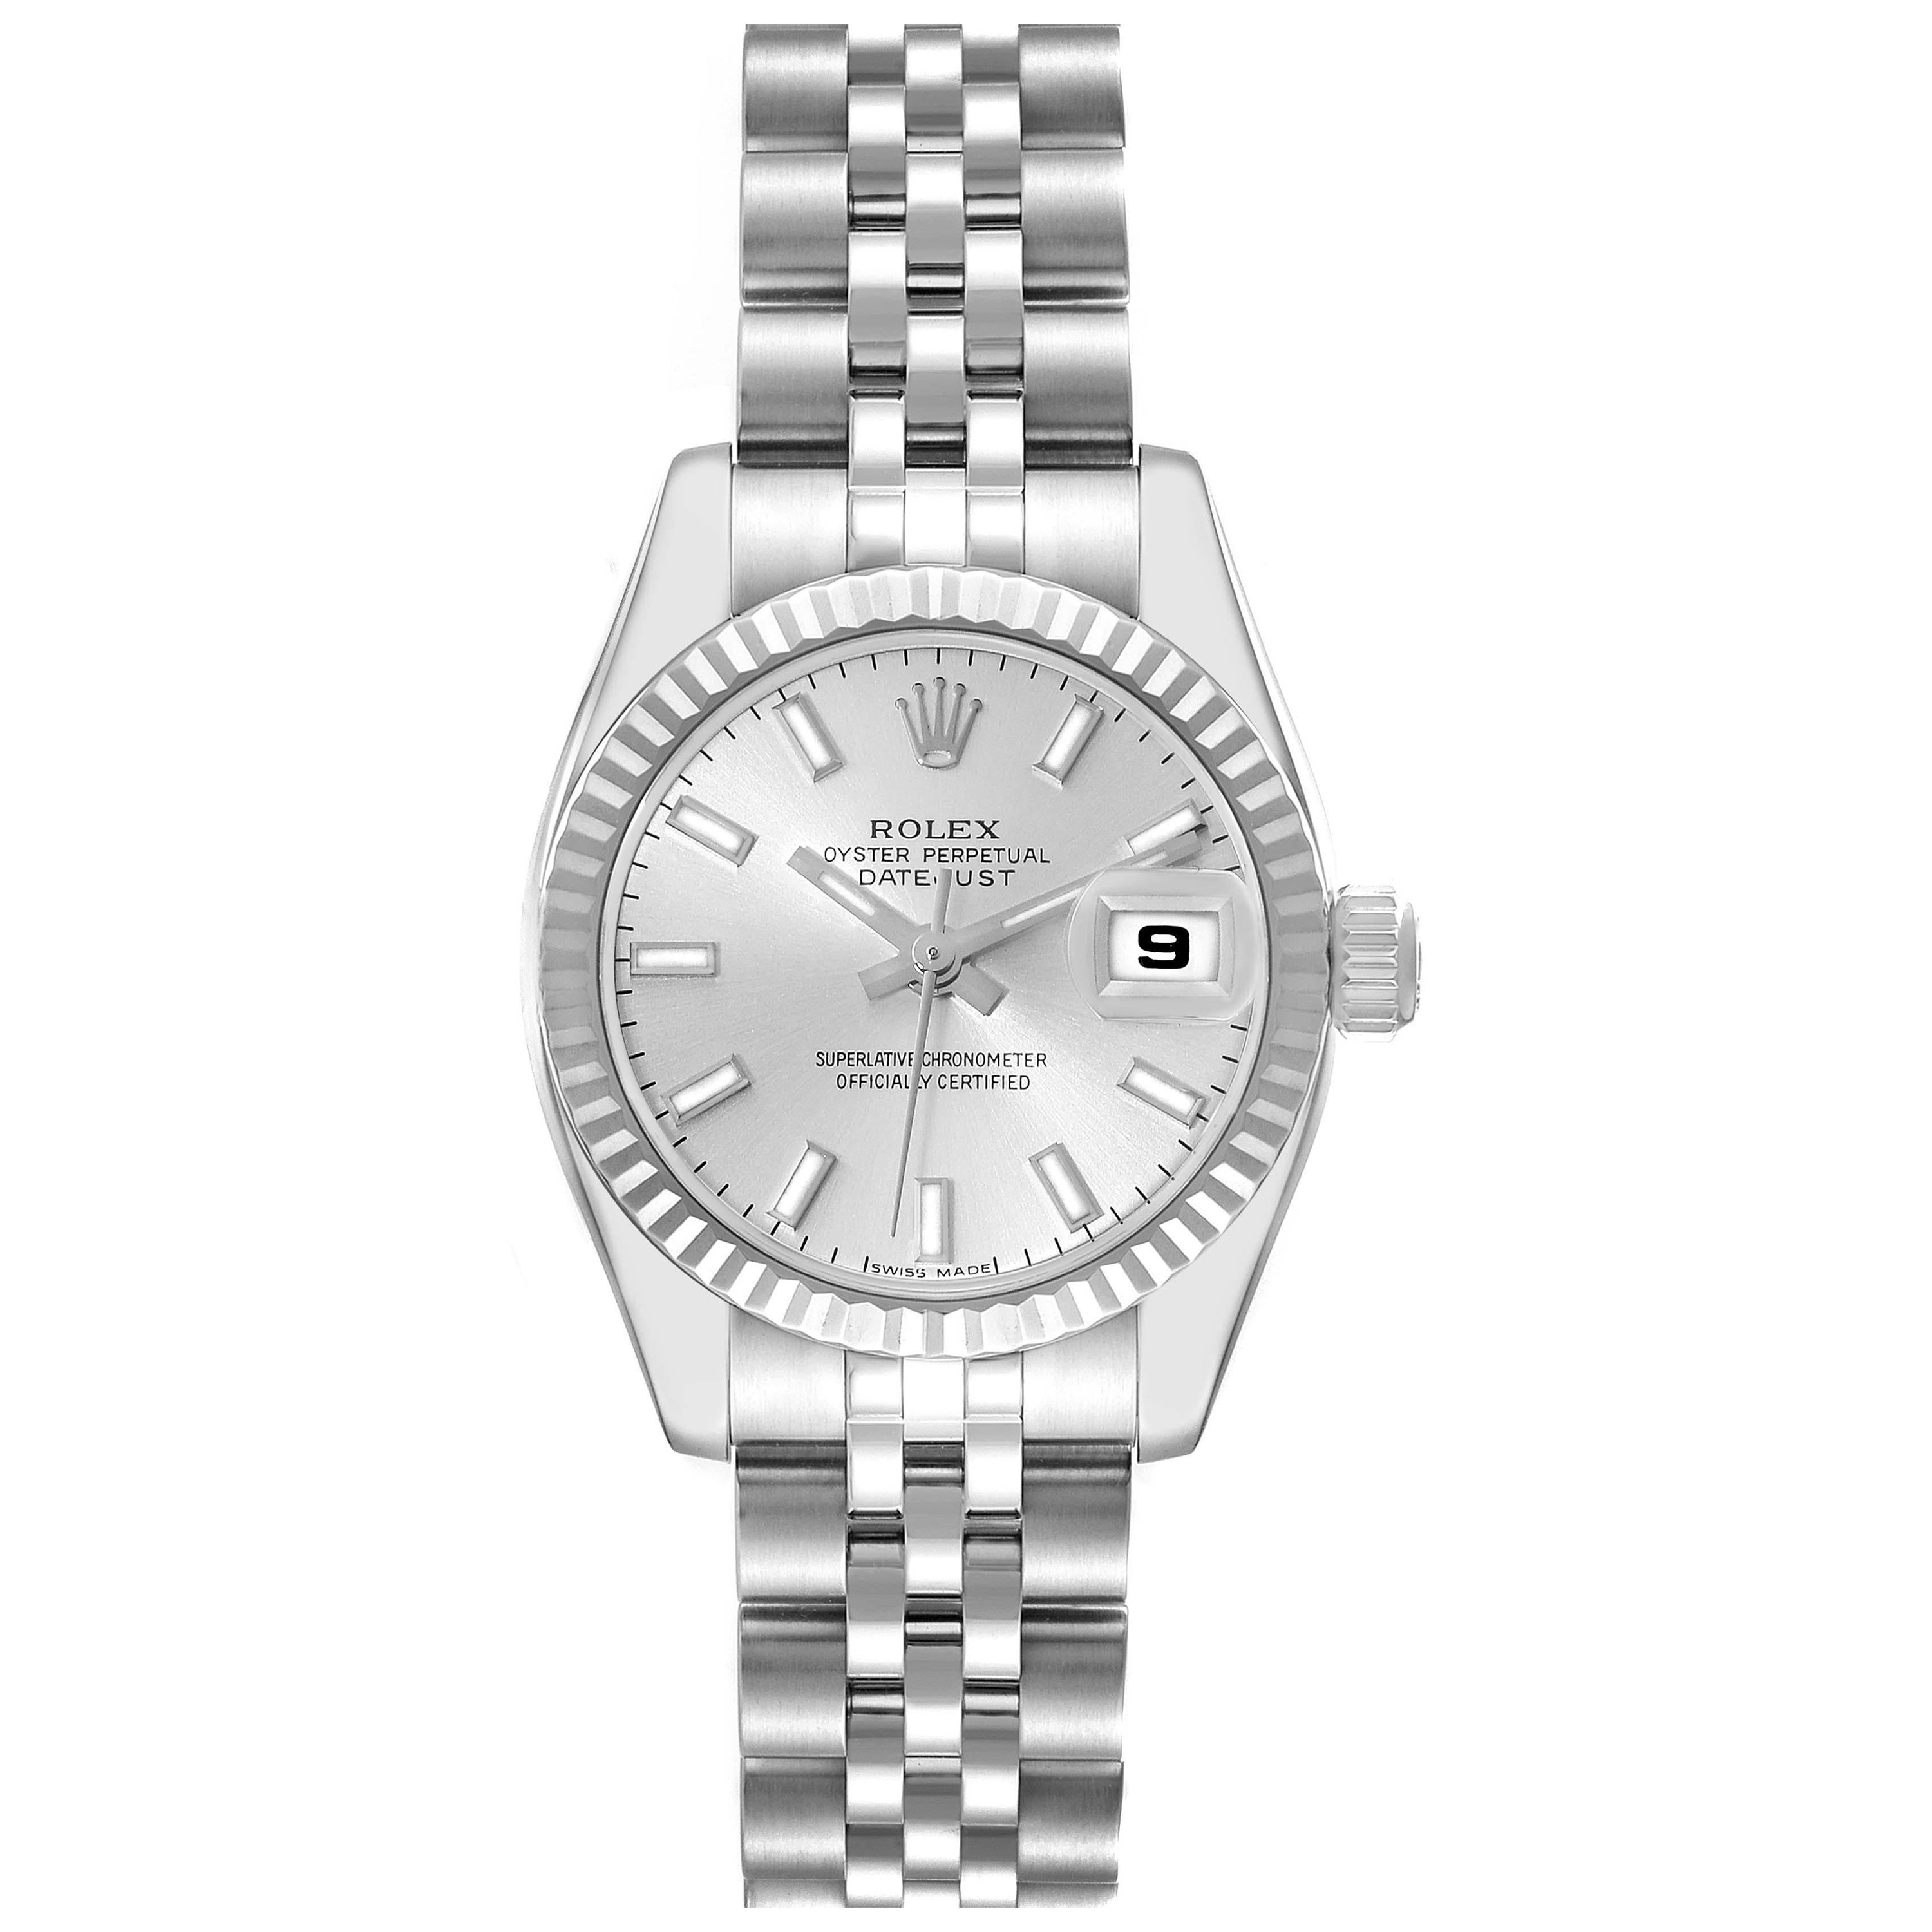 Rolex Datejust Steel White Gold Silver Dial Ladies Watch 179174 Box Papers en vente